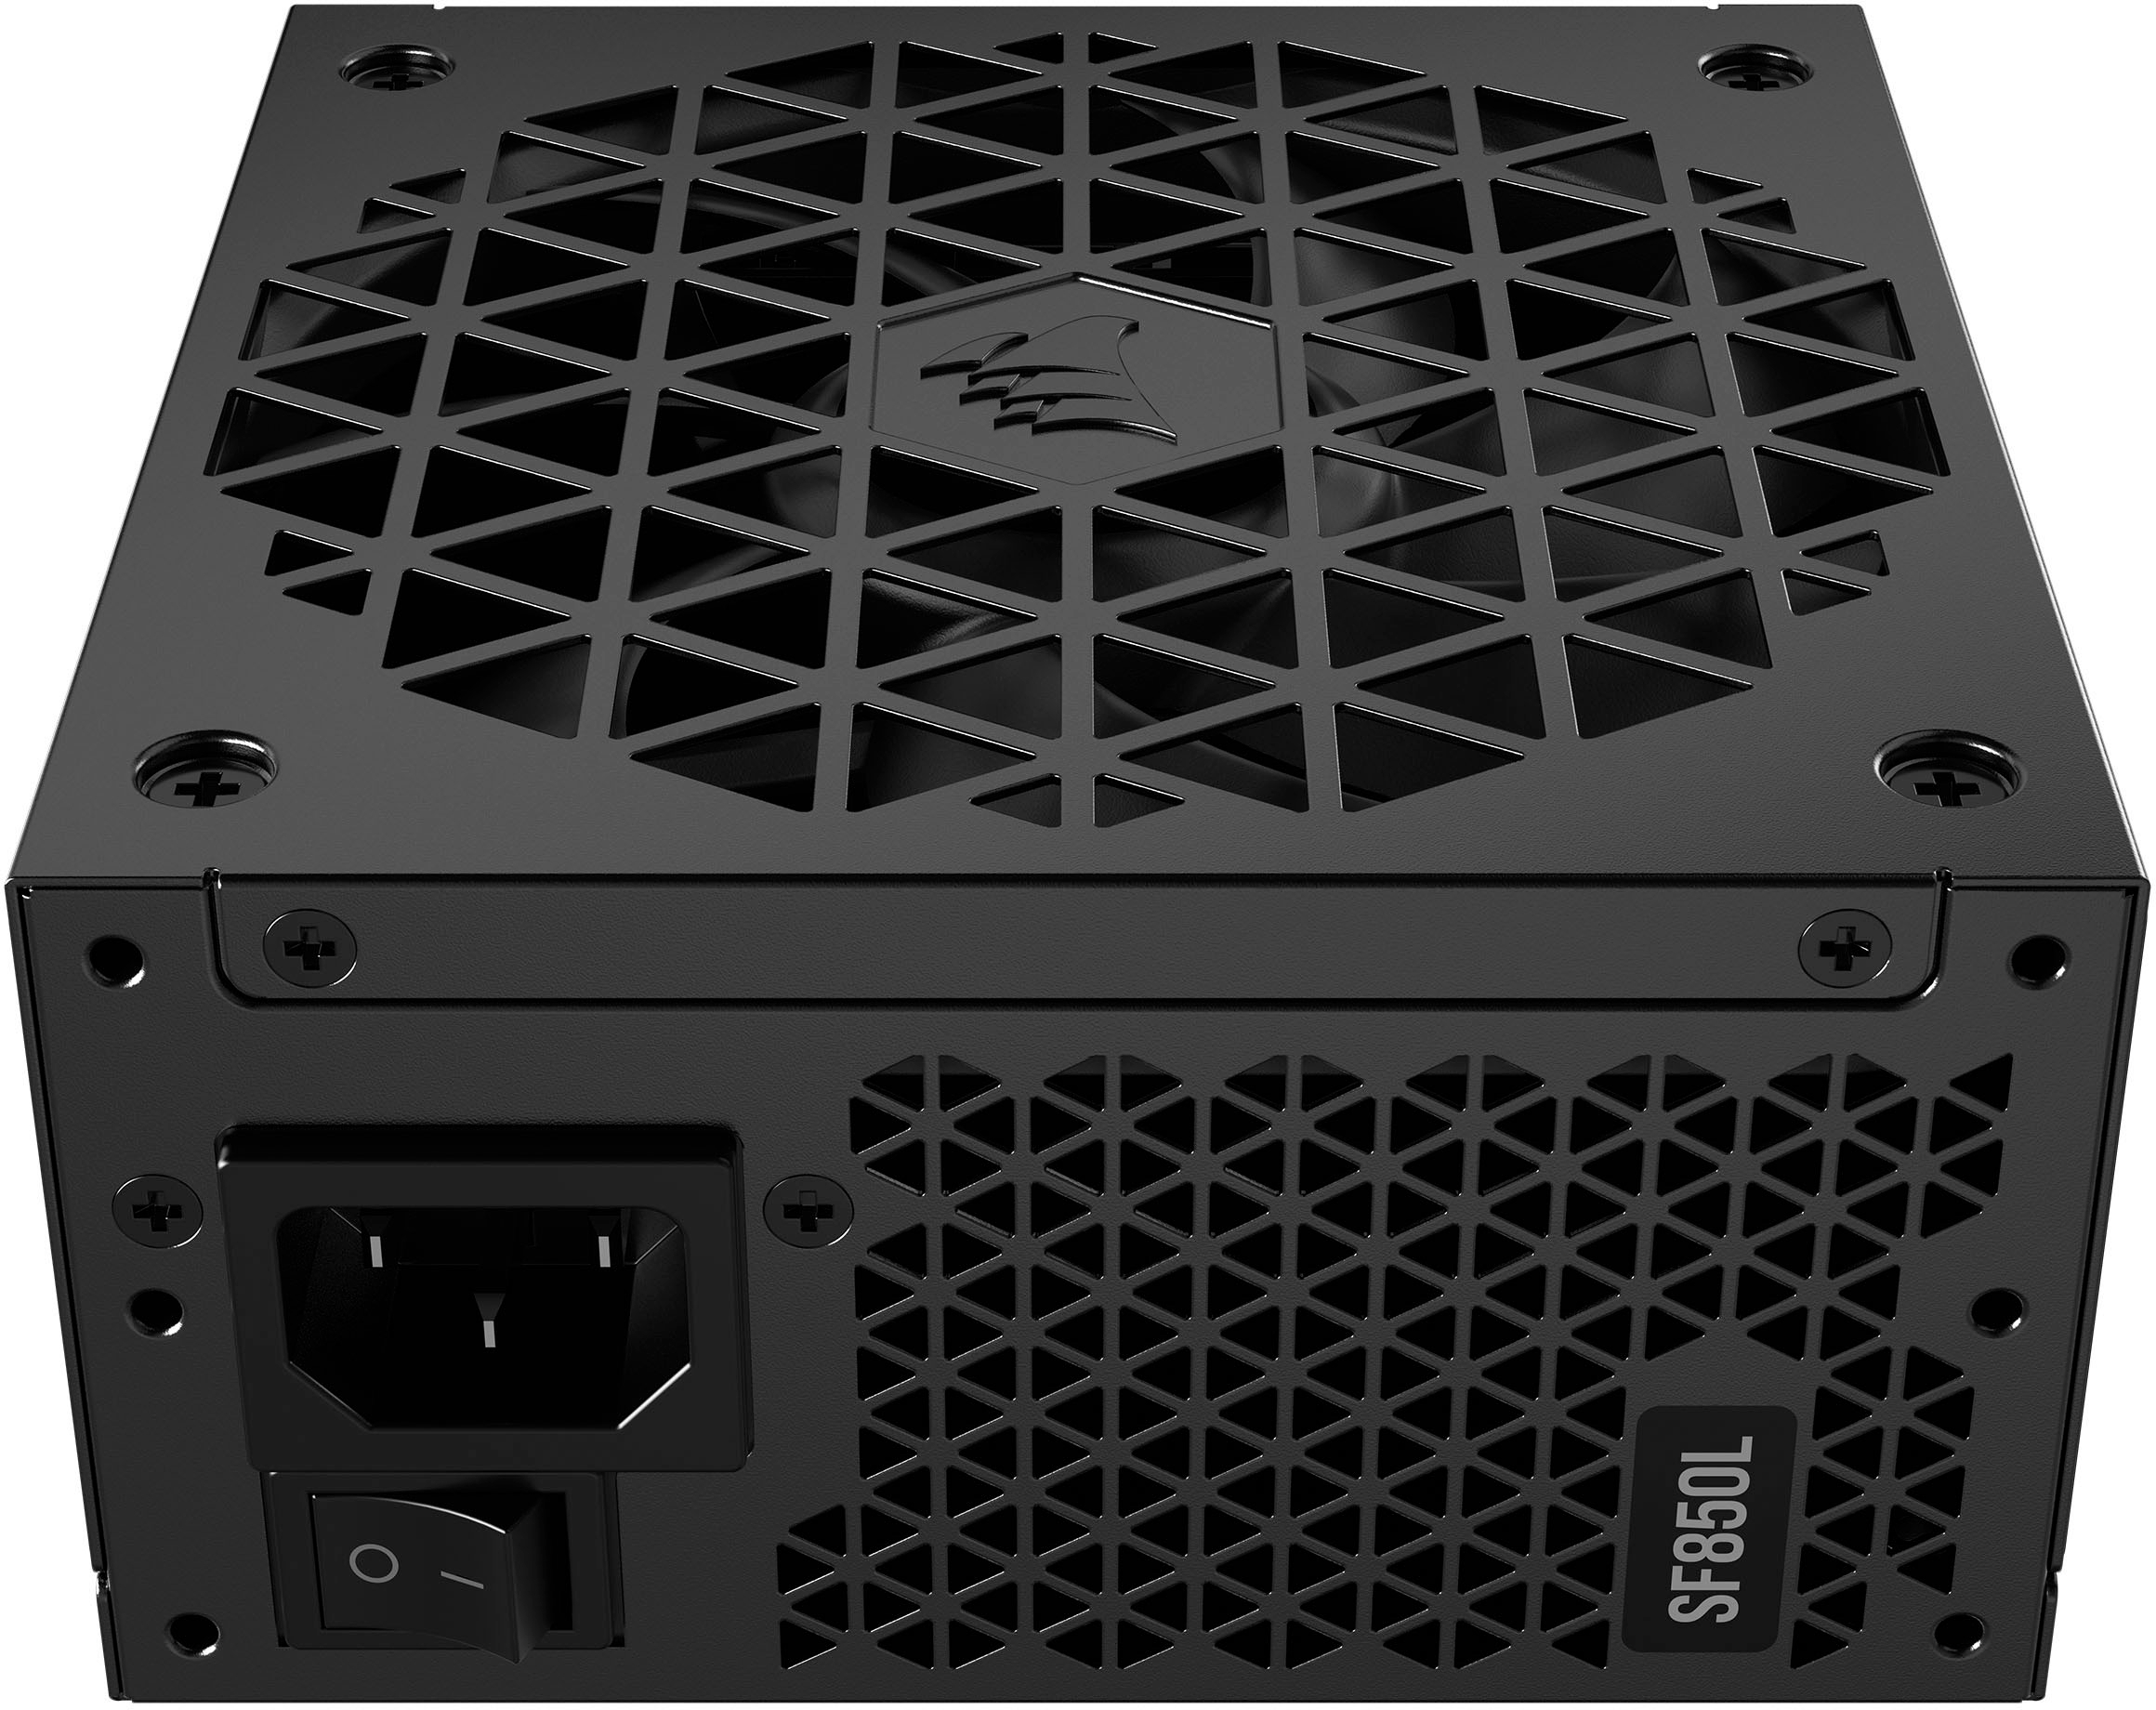 Corsair SF850L SFX-L PSU Review - The BEST SFX-L PSU - Hardware Busters